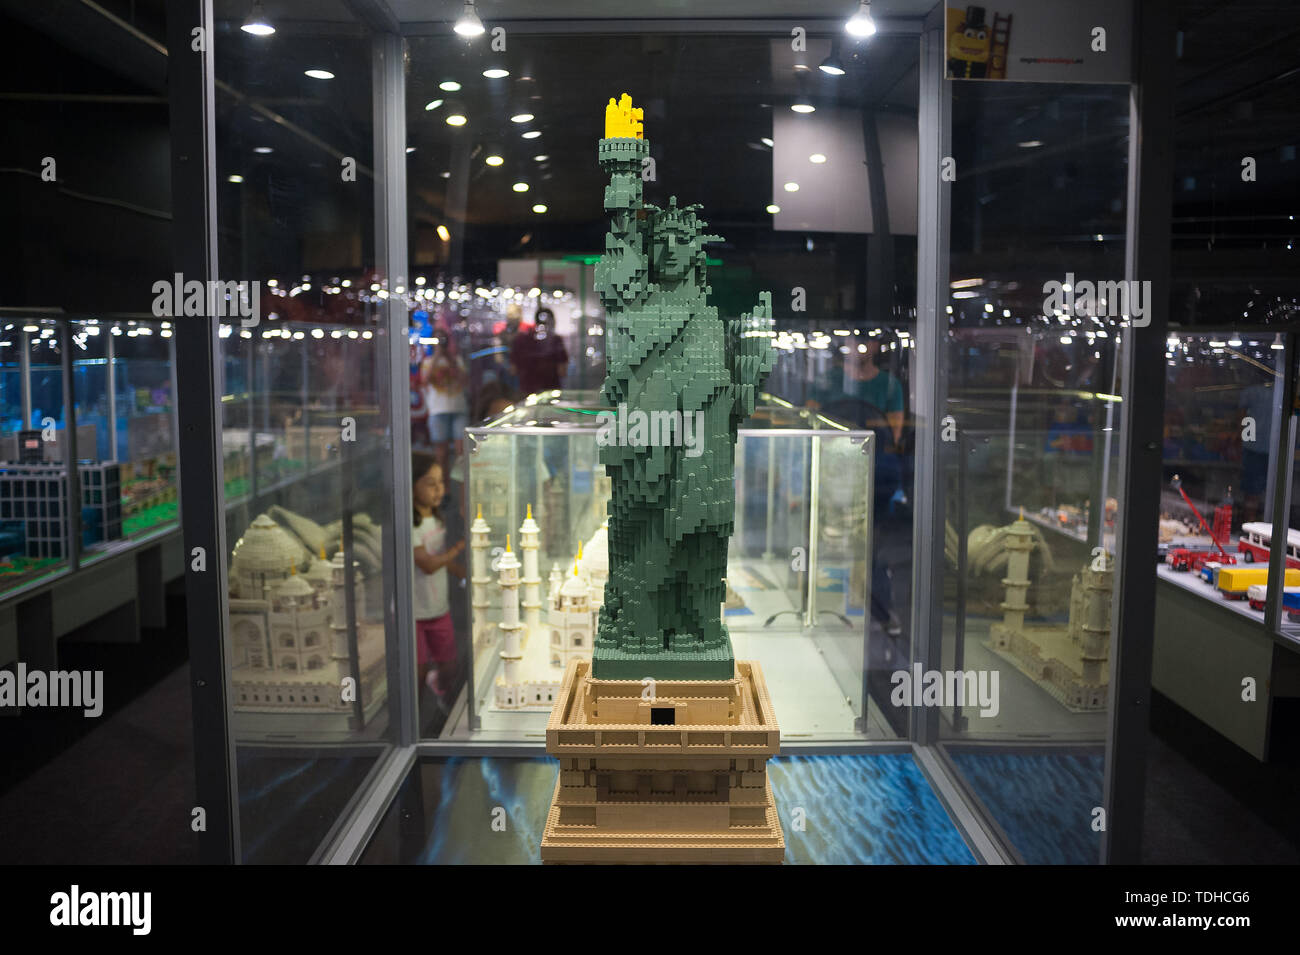 Malaga, Spain. 16th June, 2019. A mockup depicting the Liberty Enlightening the World displayed inside a glass cabinet during the exhibition. The LEGO exhibition is a temporary exhibition, the most biggest of Europe about figures of LEGO, showing different mockups mounted with more than 5 million of LEGO pieces to large scale such as Titanic ship, replicas of basketball players, the human body, characters of the film Star Wars, MARVEL and others. Credit: SOPA Images Limited/Alamy Live News Stock Photo